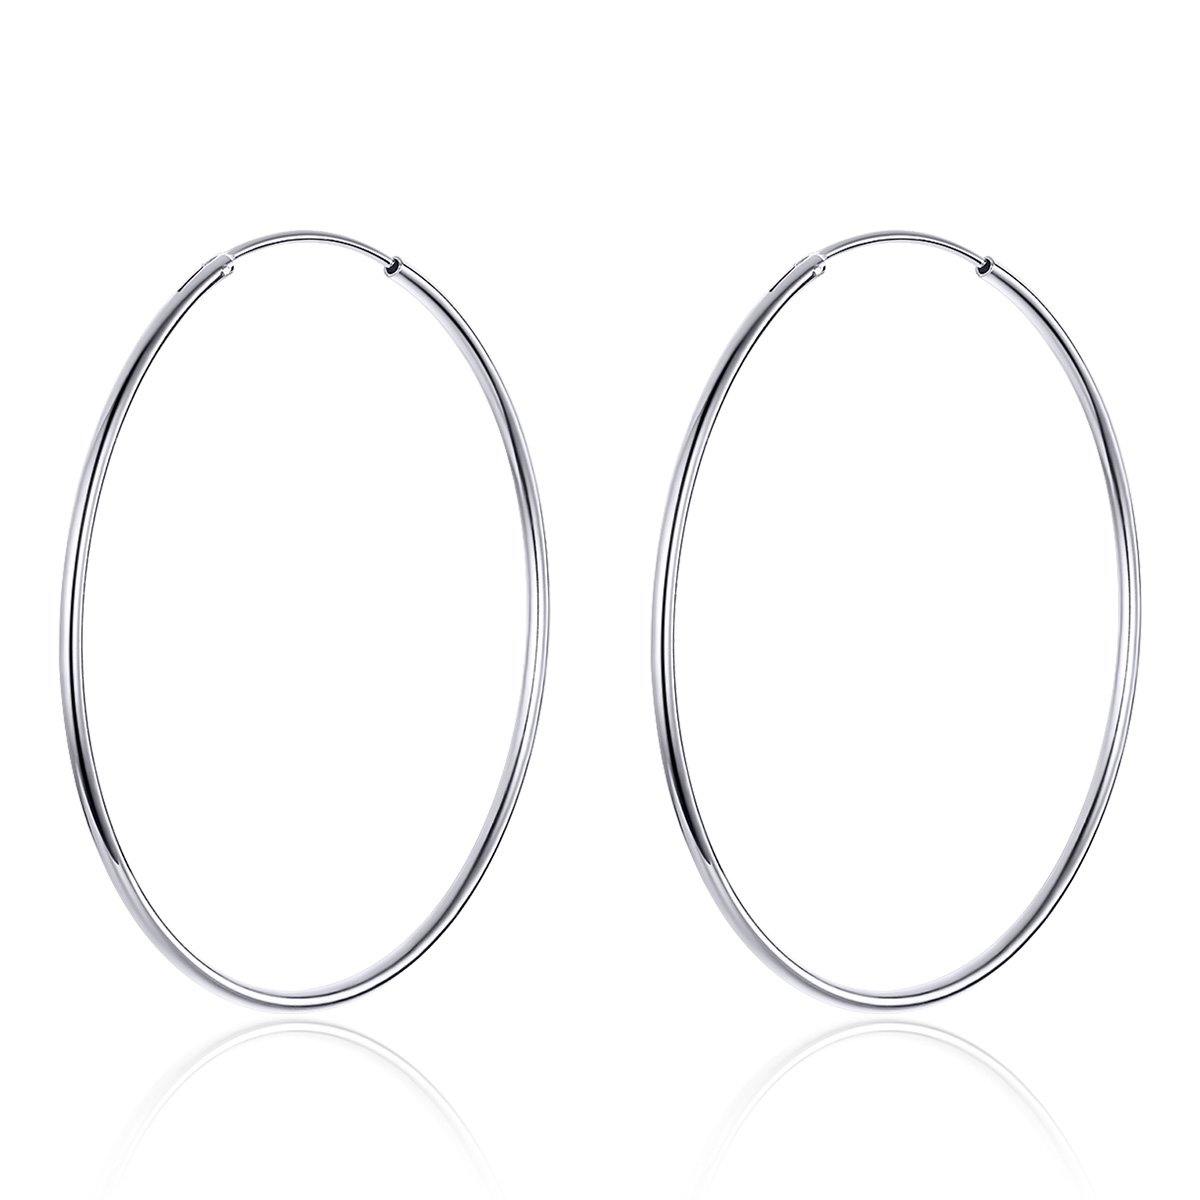 Simple Circle 925 Sterling Silver Earrings - Aisllin Jewelry